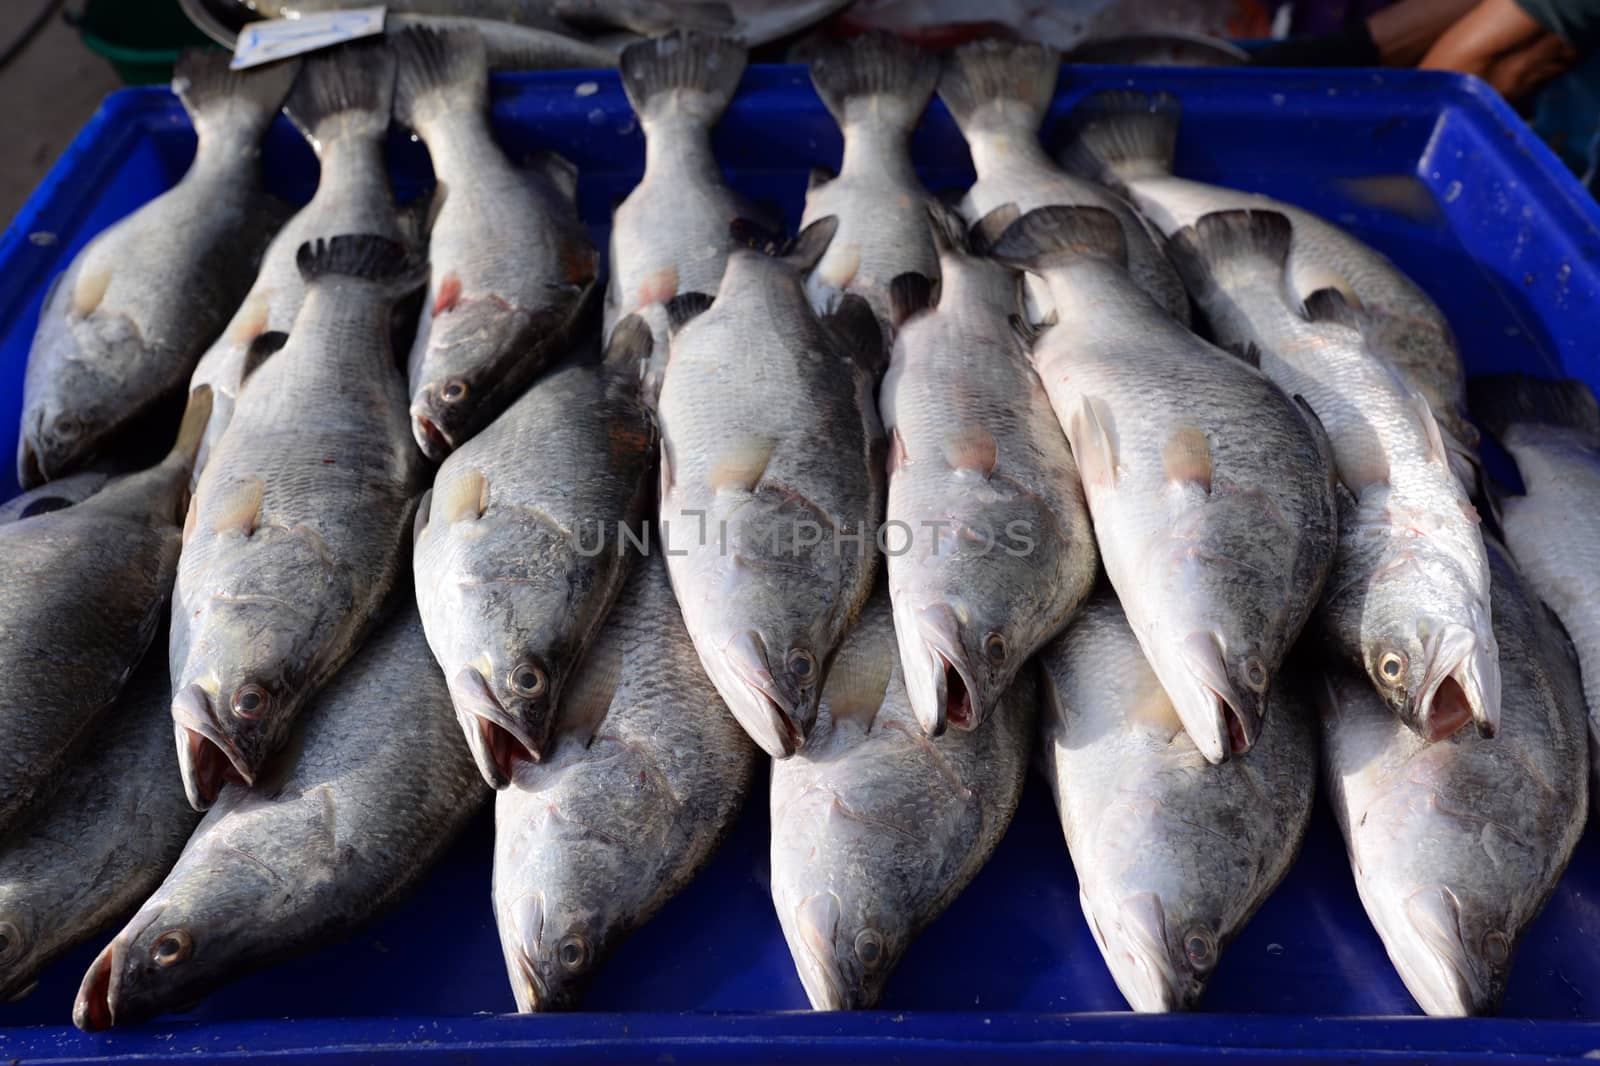 Large seabass arranged in a blue tray, in the local market of Thailand.